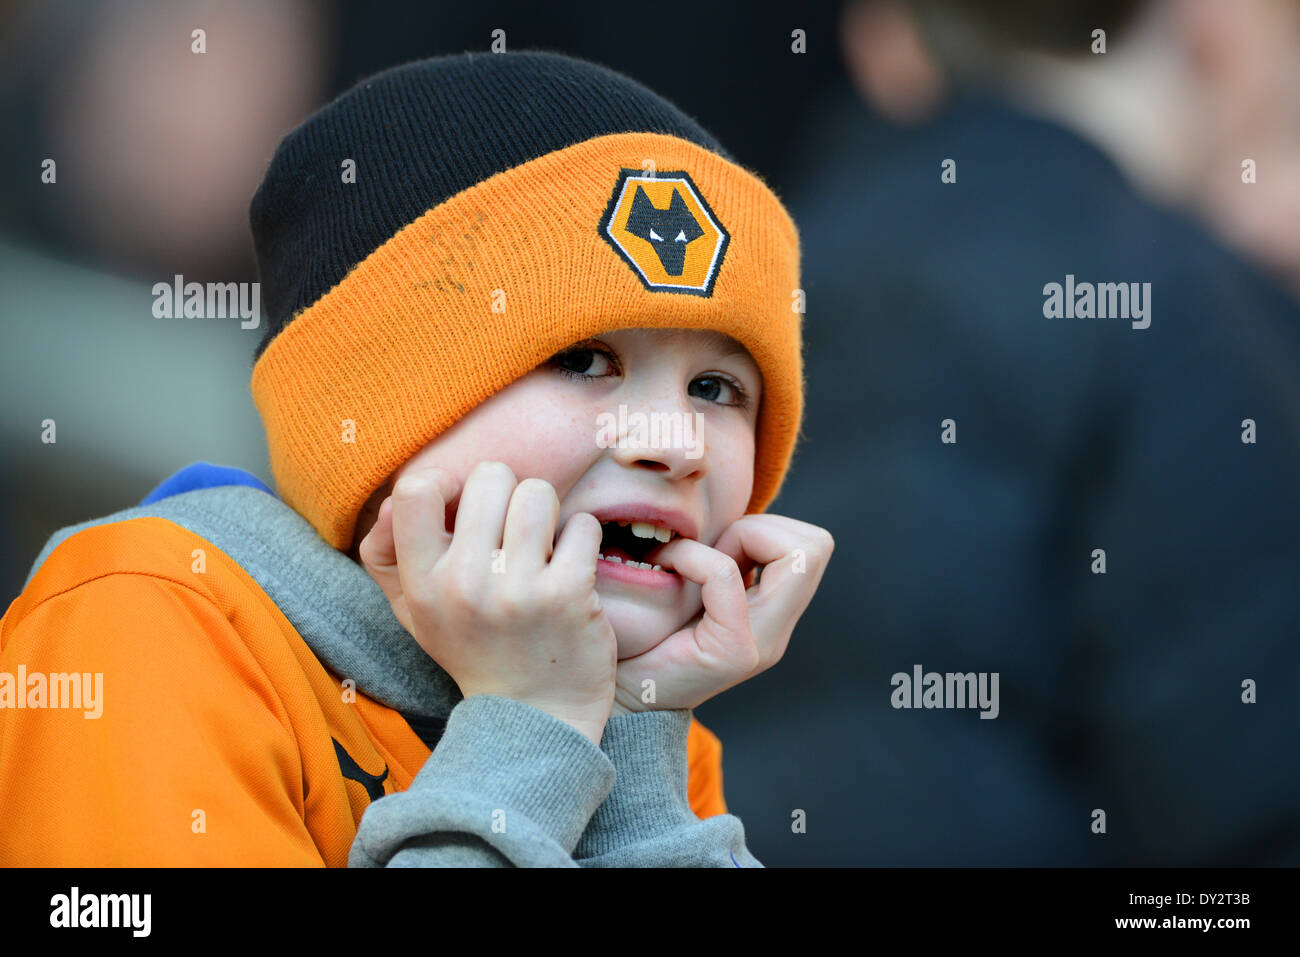 Young boy football supporter wearing woolen hat Uk Stock Photo